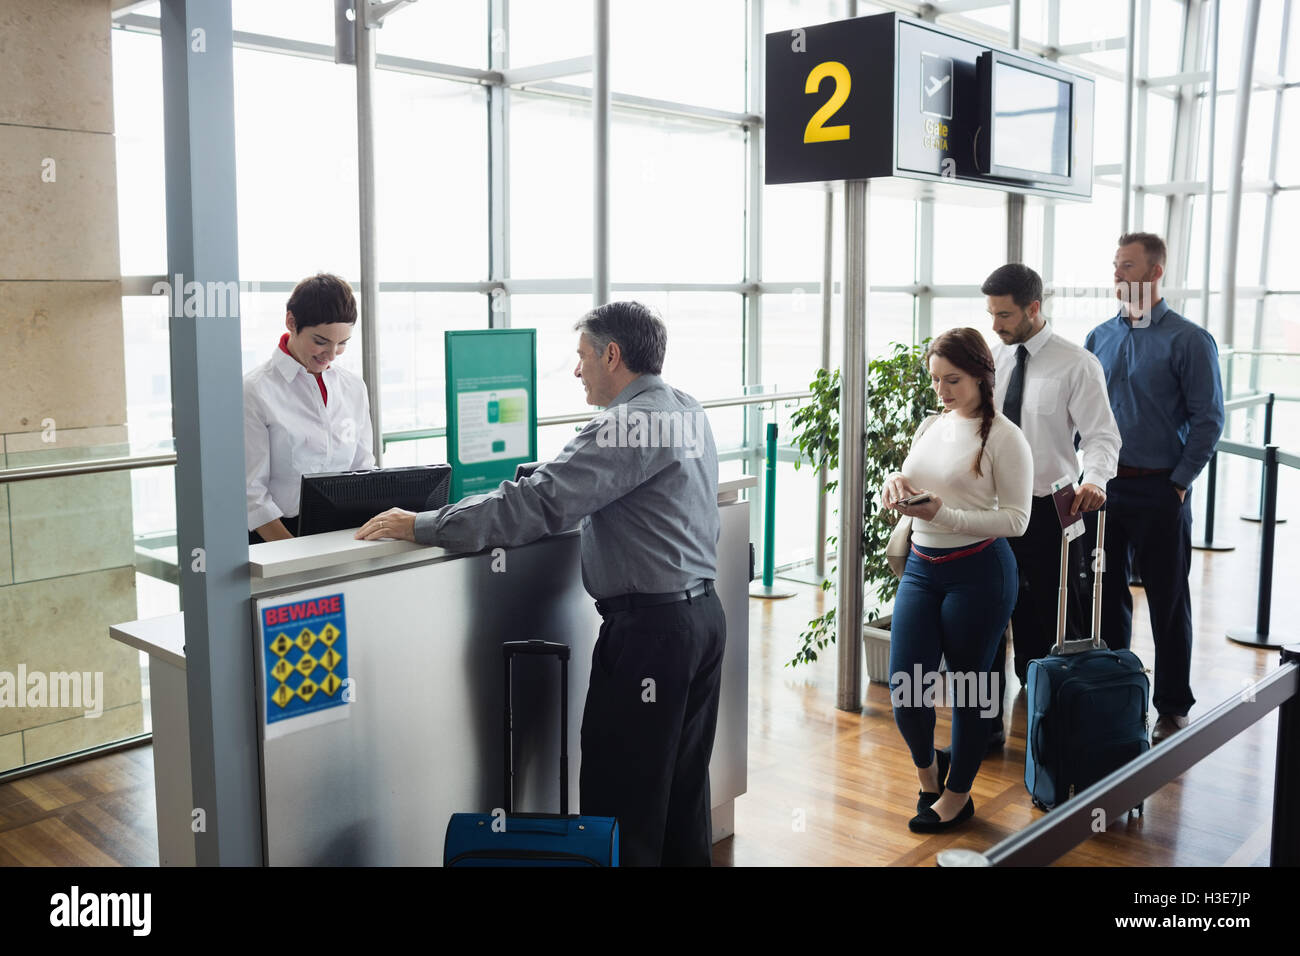 Passengers waiting in queue at check-in counter Stock Photo